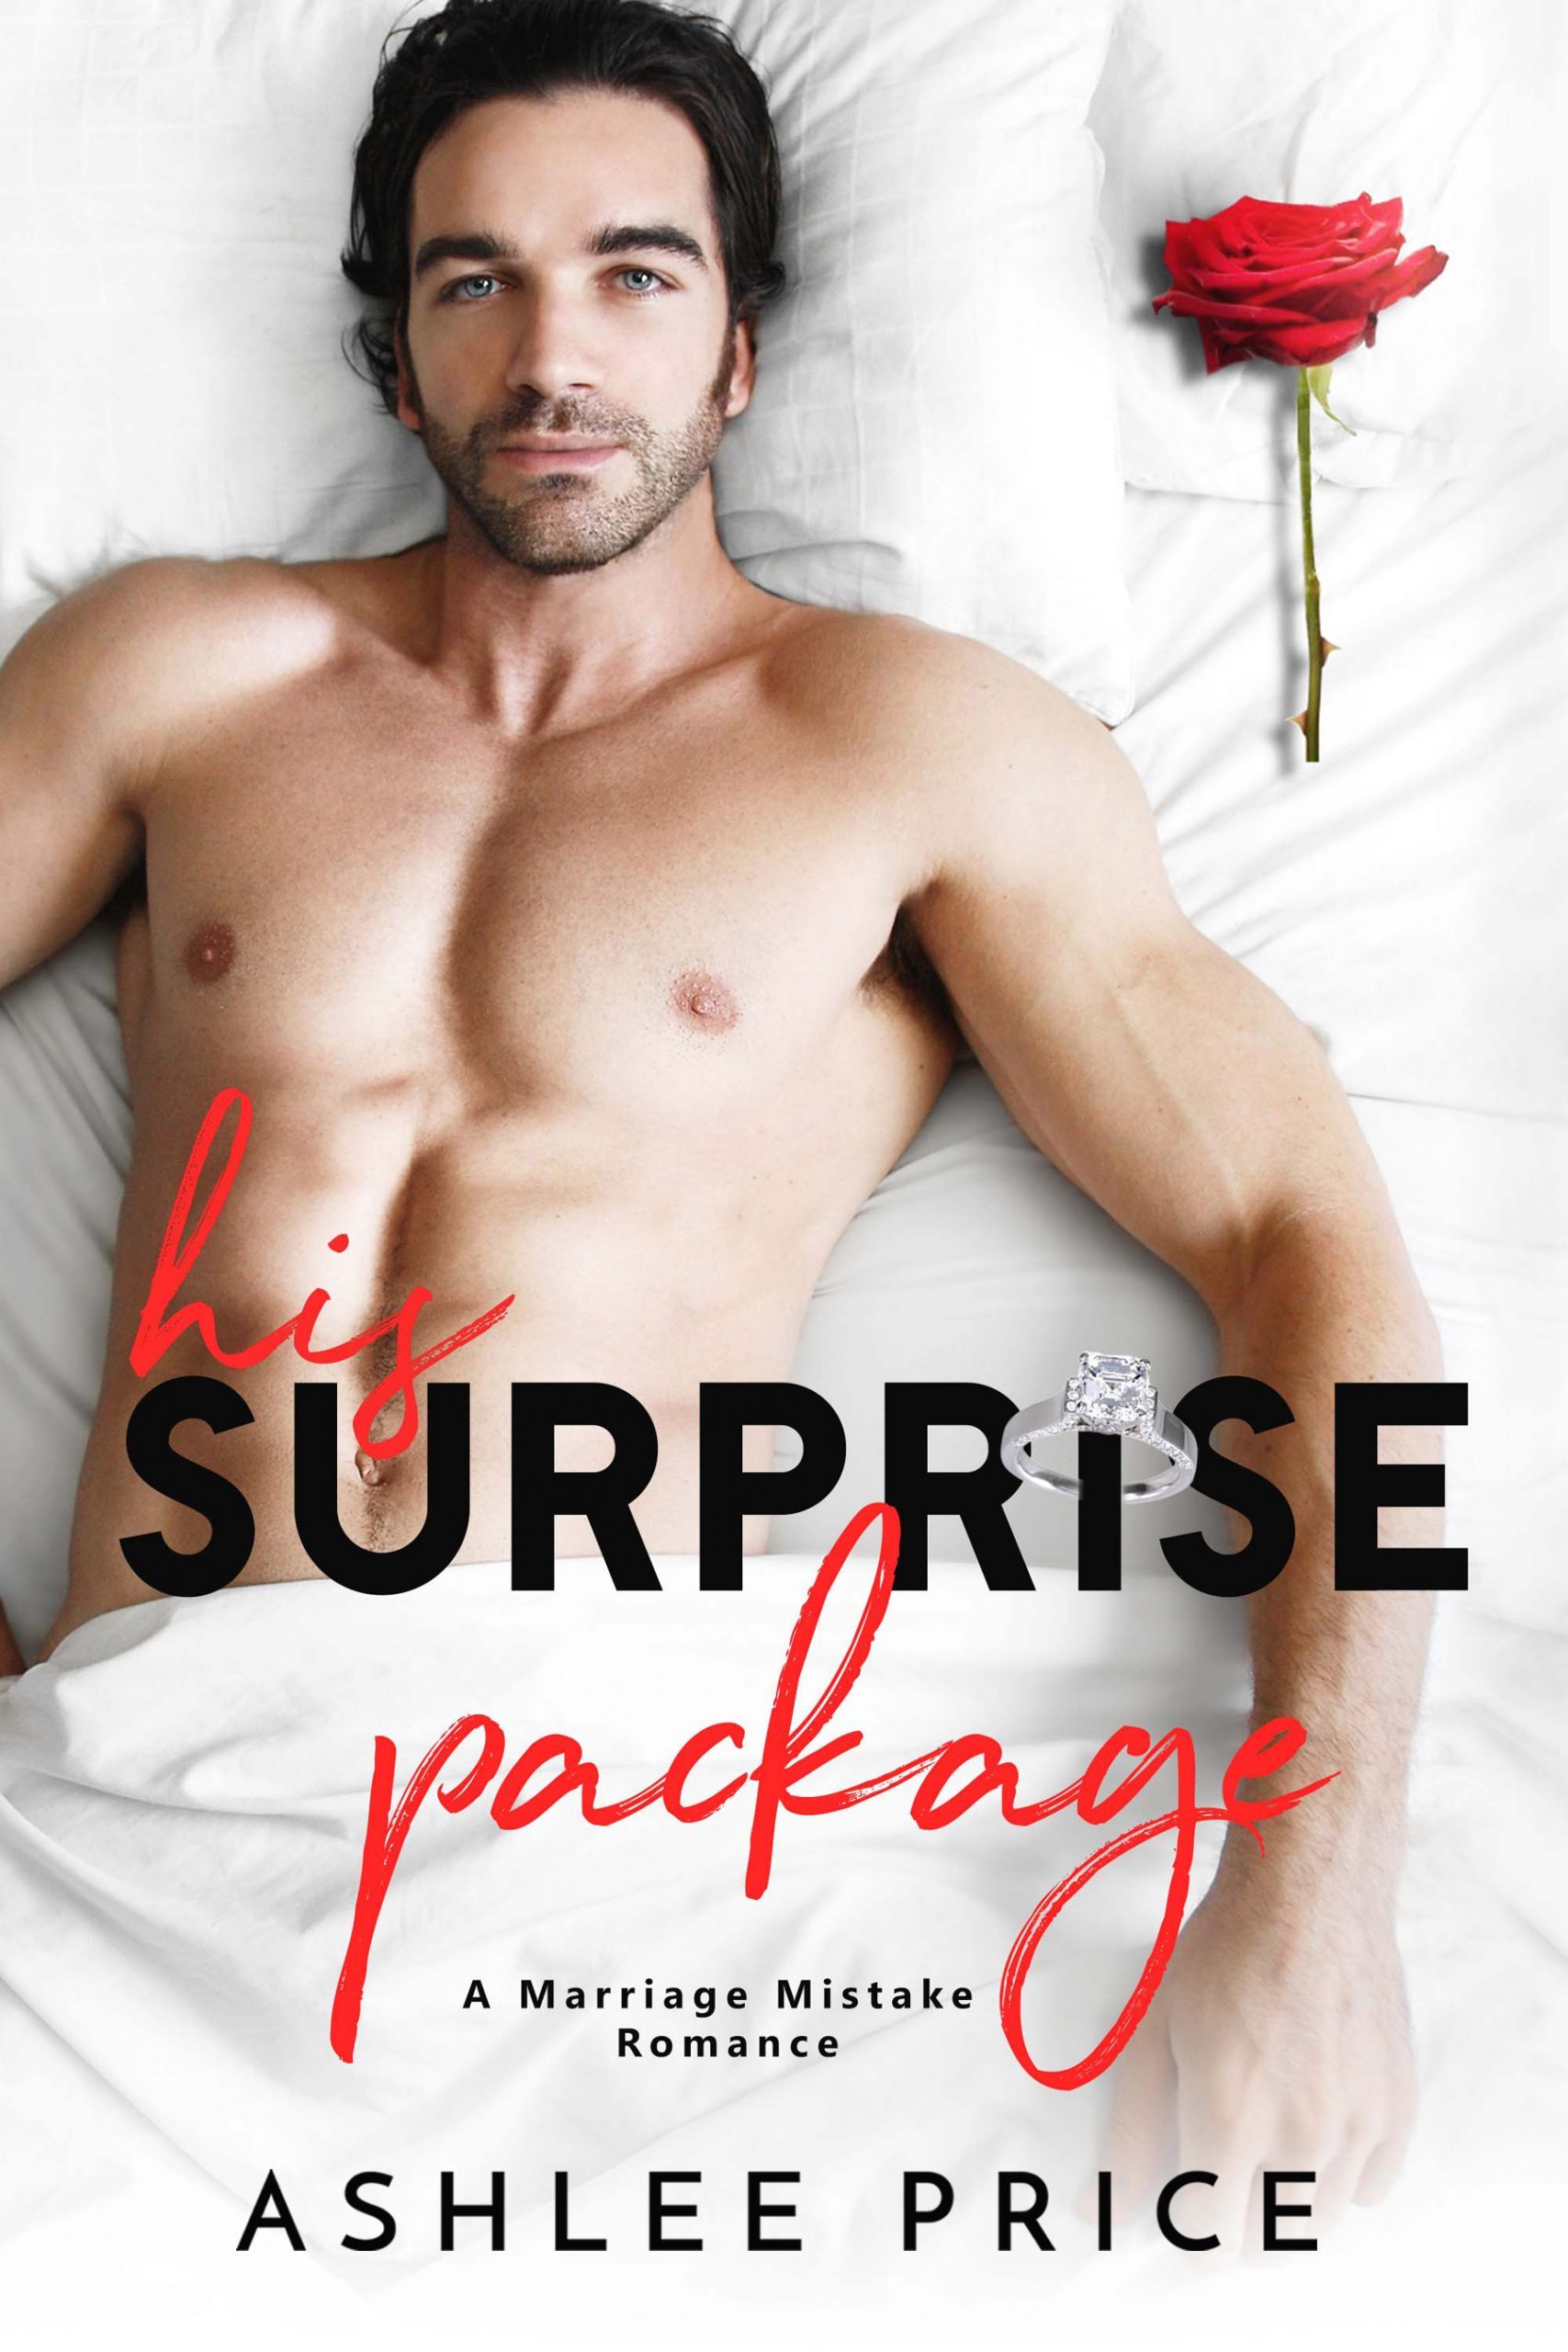 hissurprisepackage6x9new-1883017